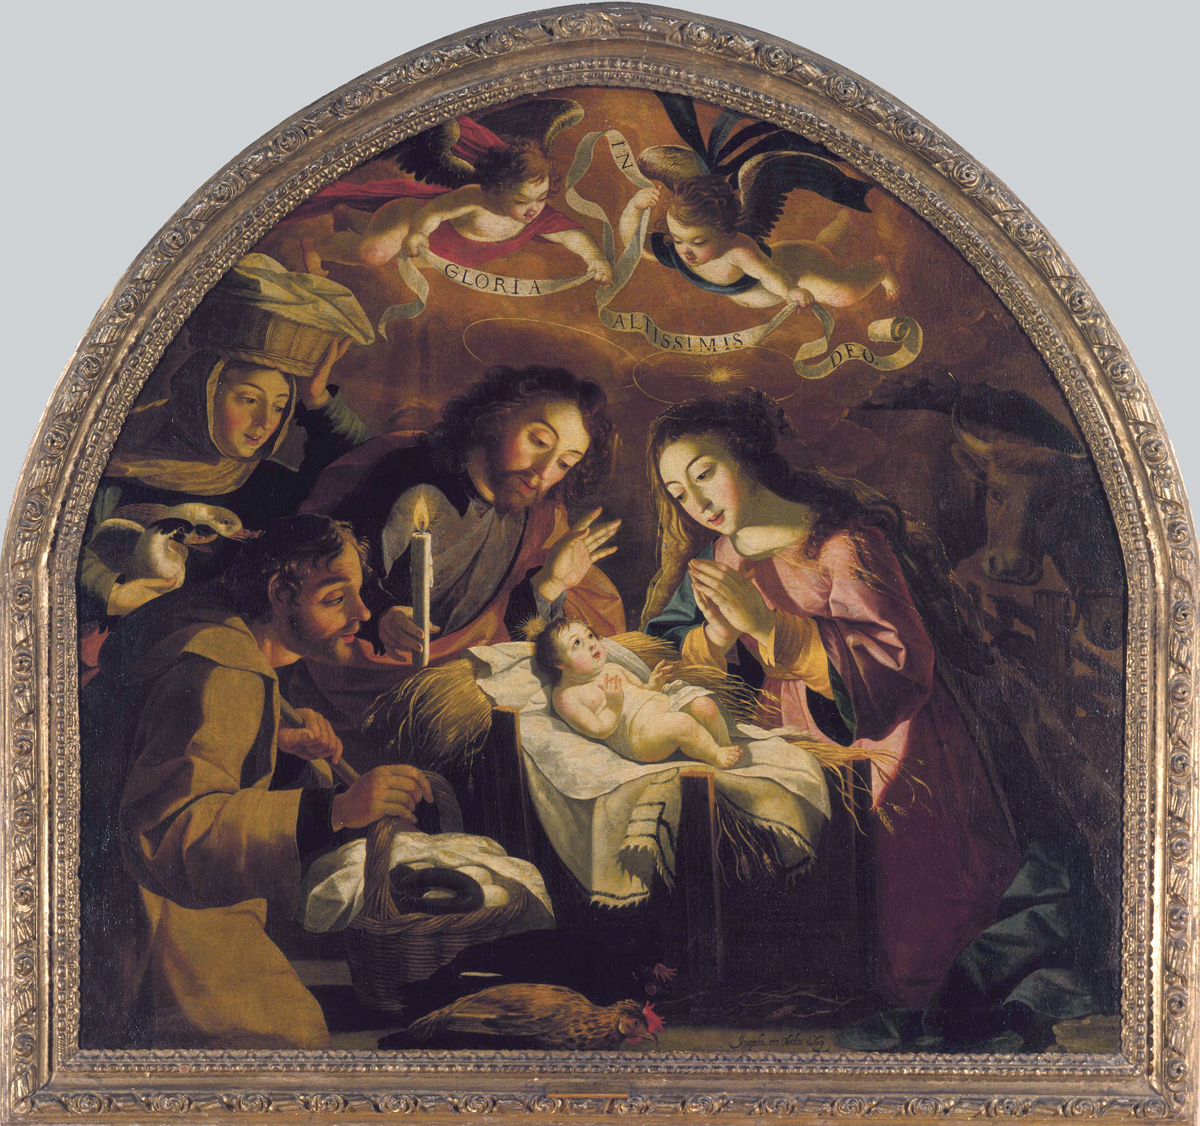 A painting of the infant Jesus in the manger, surrounded by Mary and Joseph with two putti figures above him holding a banner. There are two other figures, a man and a woman, at left, attending to him. Joseph holds a candle while Mary holds her hands clasped in prayer, both looking down at the infant. The painted is arched at the top and surrounded with a gilded frame. 